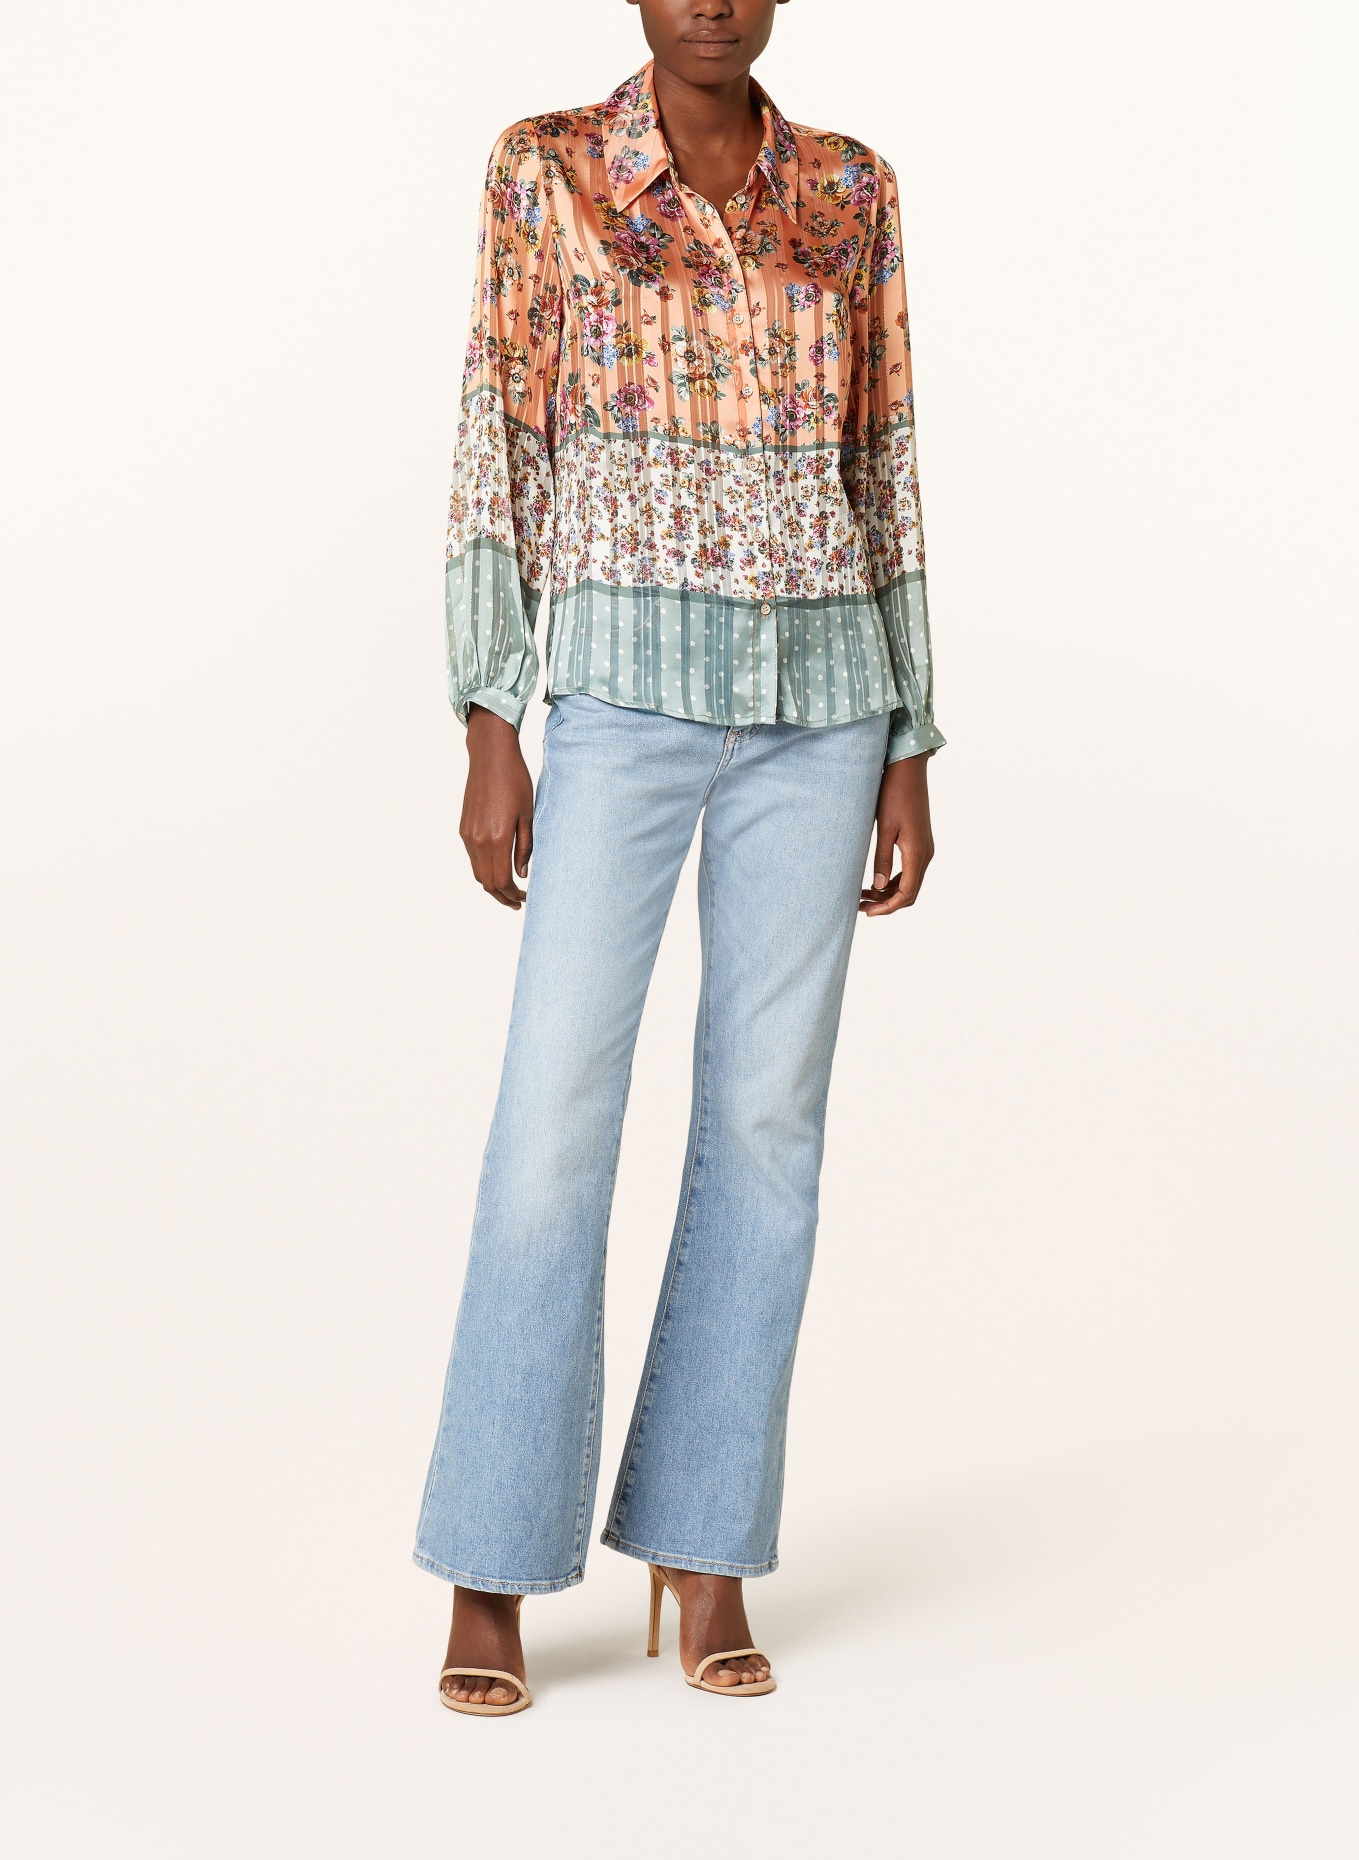 GUESS Shirt blouse DANIELLE with glitter thread, Color: ORANGE/ OLIVE/ ECRU (Image 2)